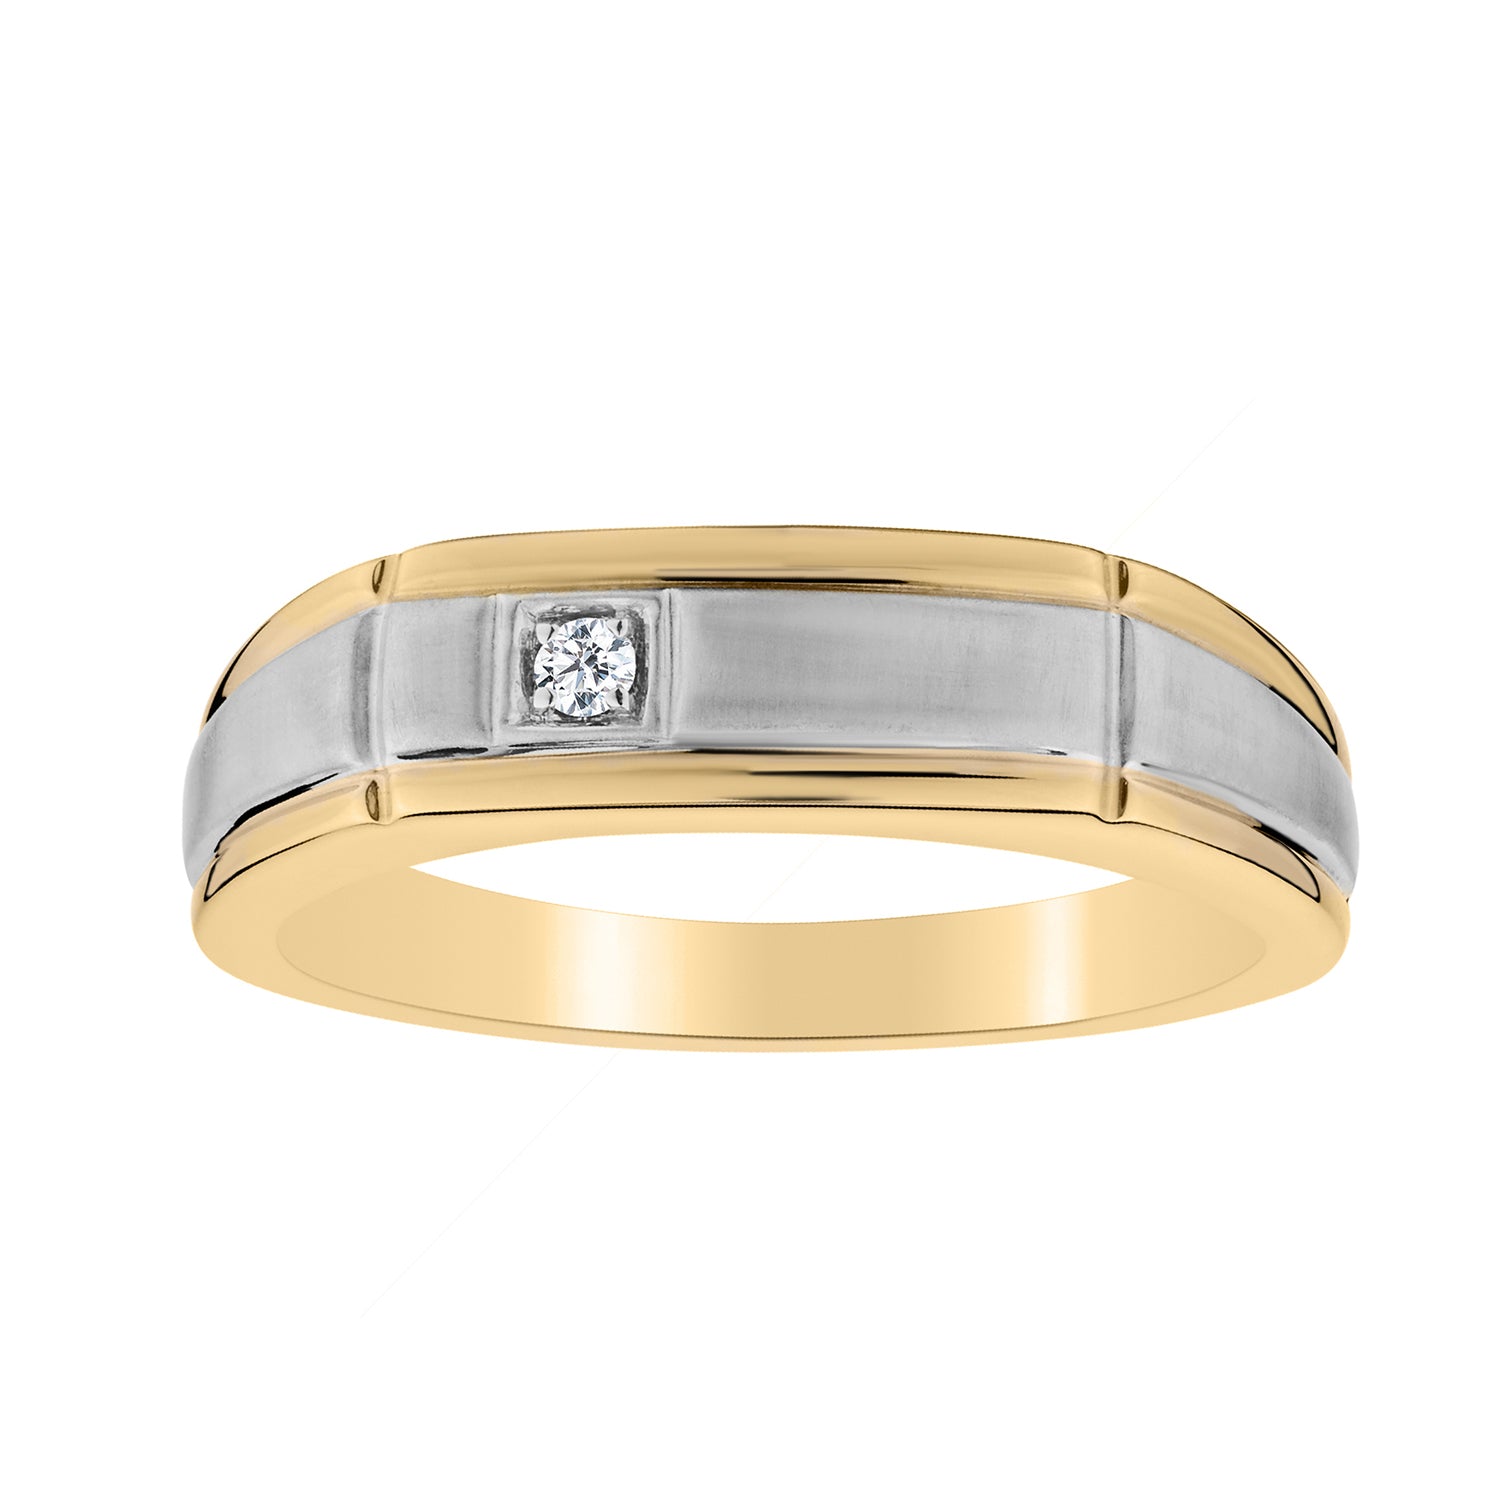 .05 Carat Diamond Gentleman's Ring, 10kt White And Yellow Gold (Two Tone). Men’s Rings. - Griffin Jewellery Designs